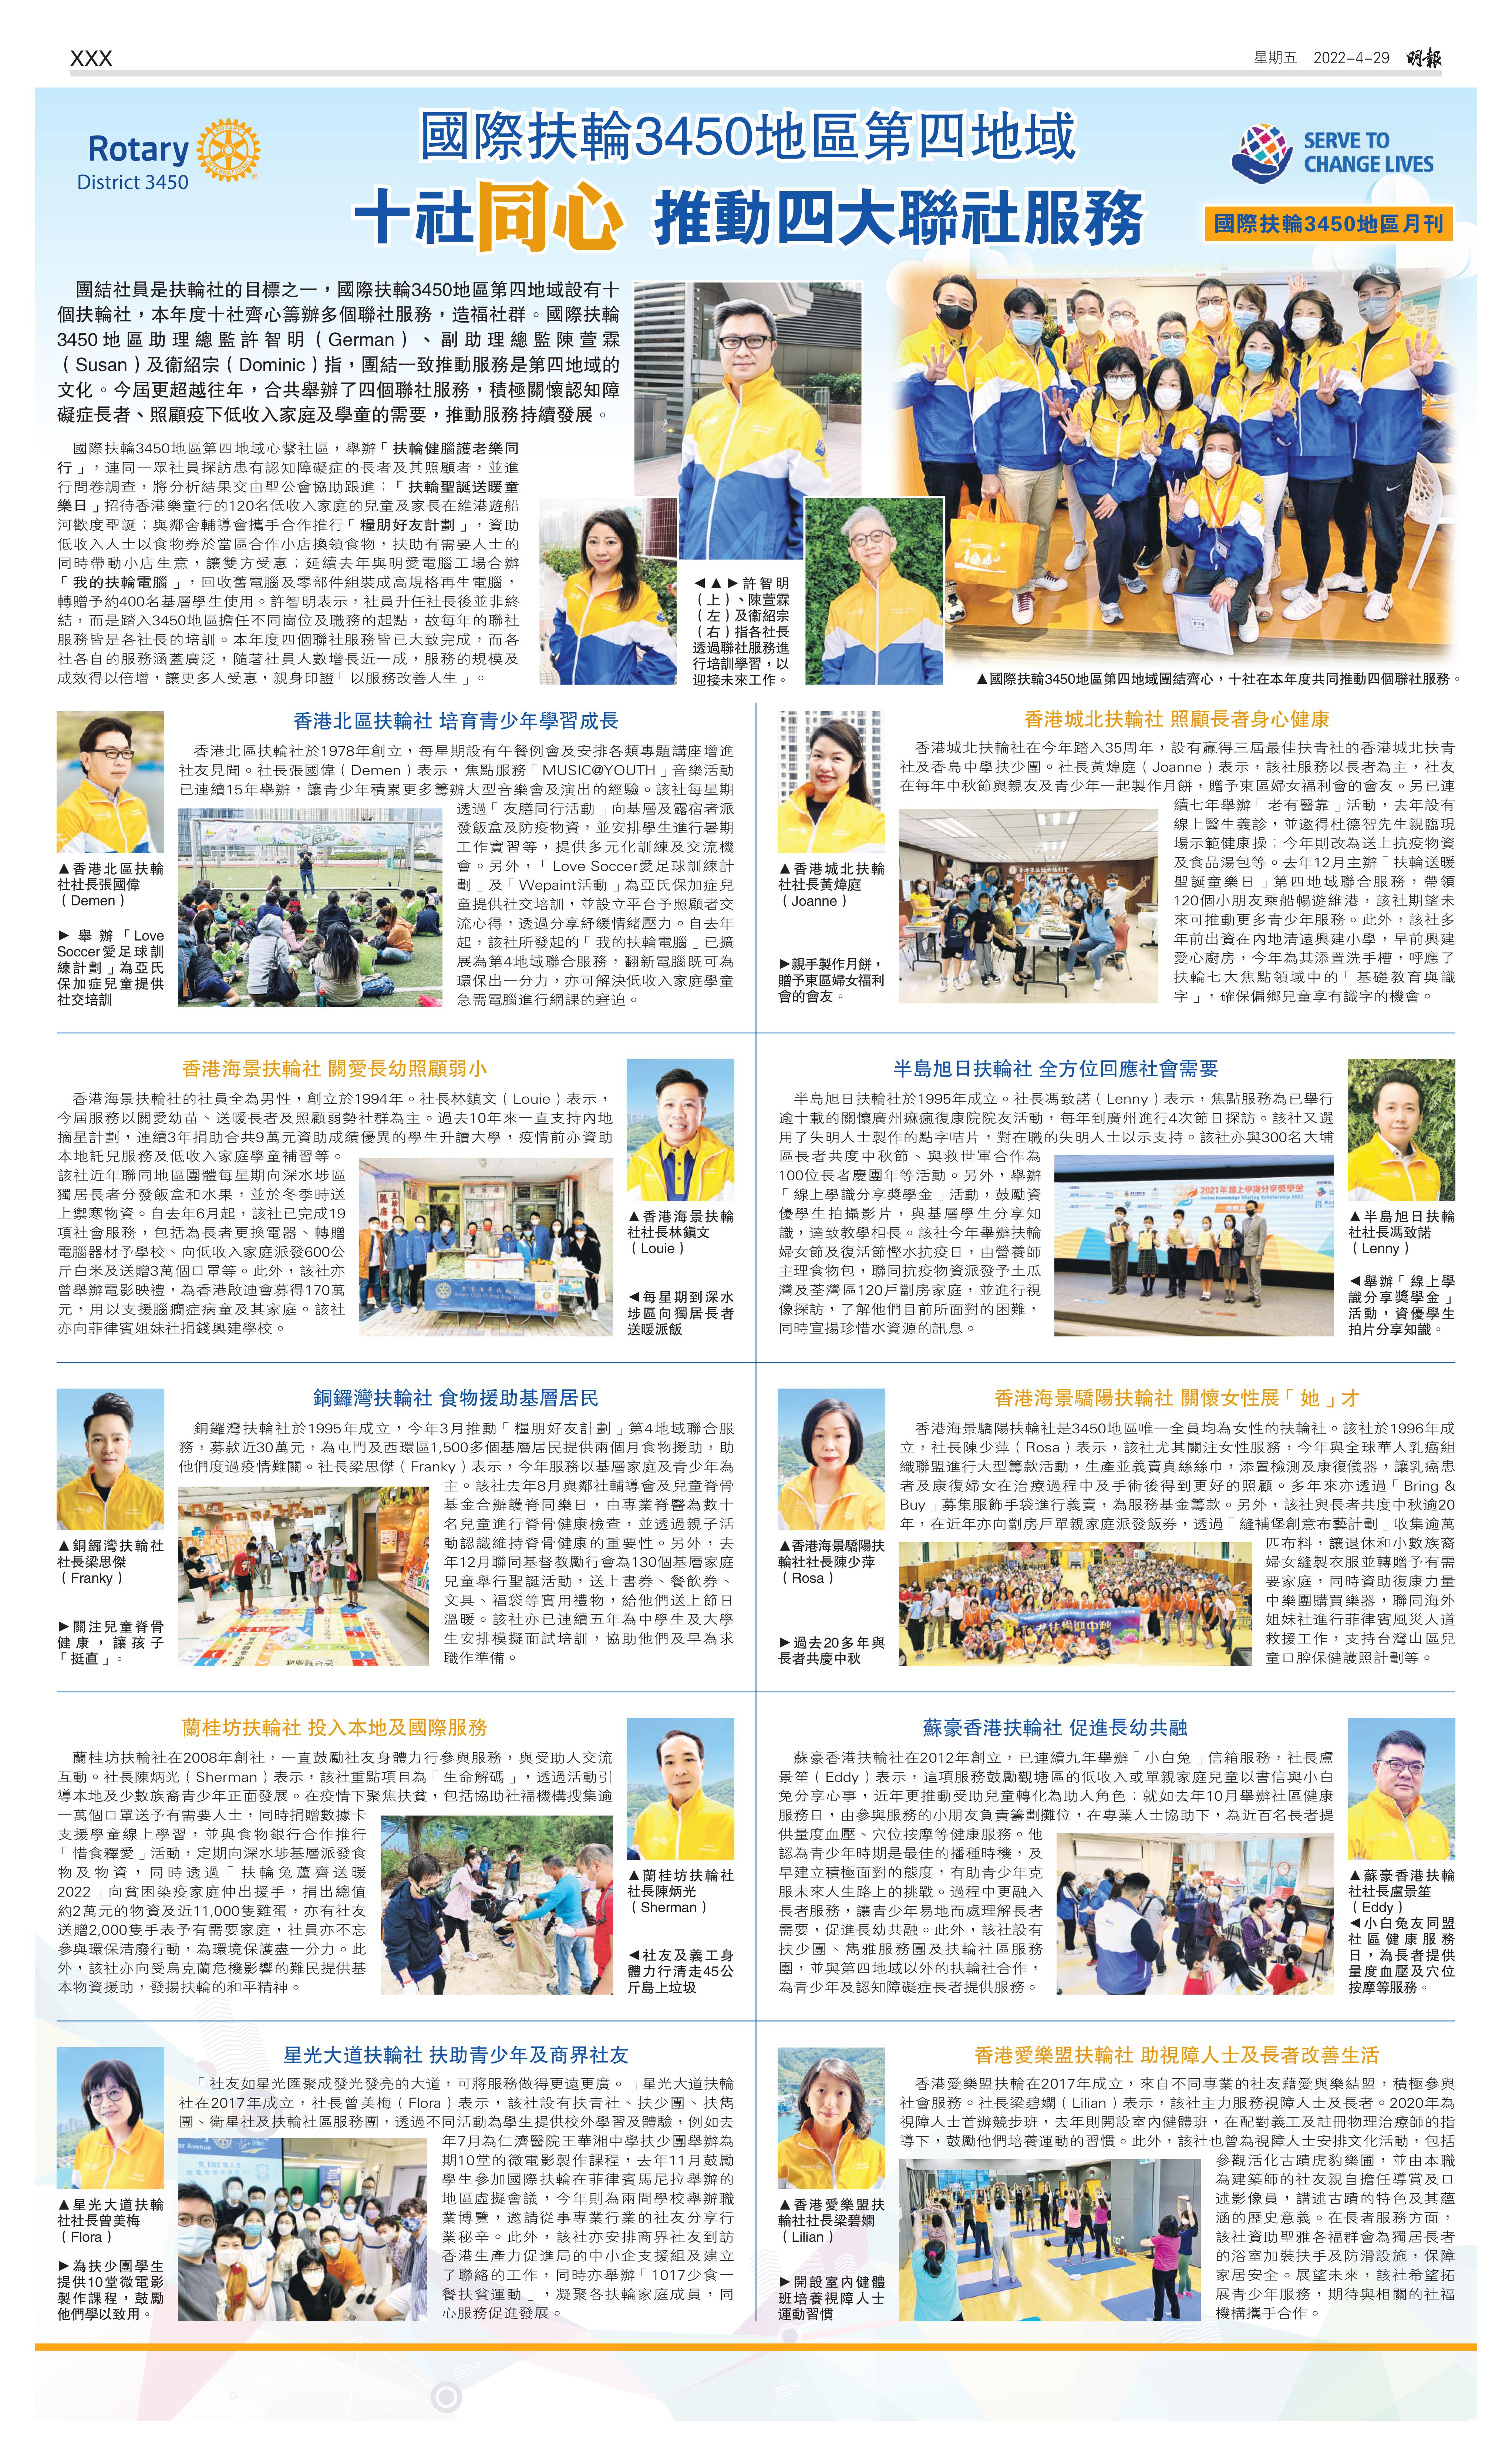 Area 4 Ming Pao interview